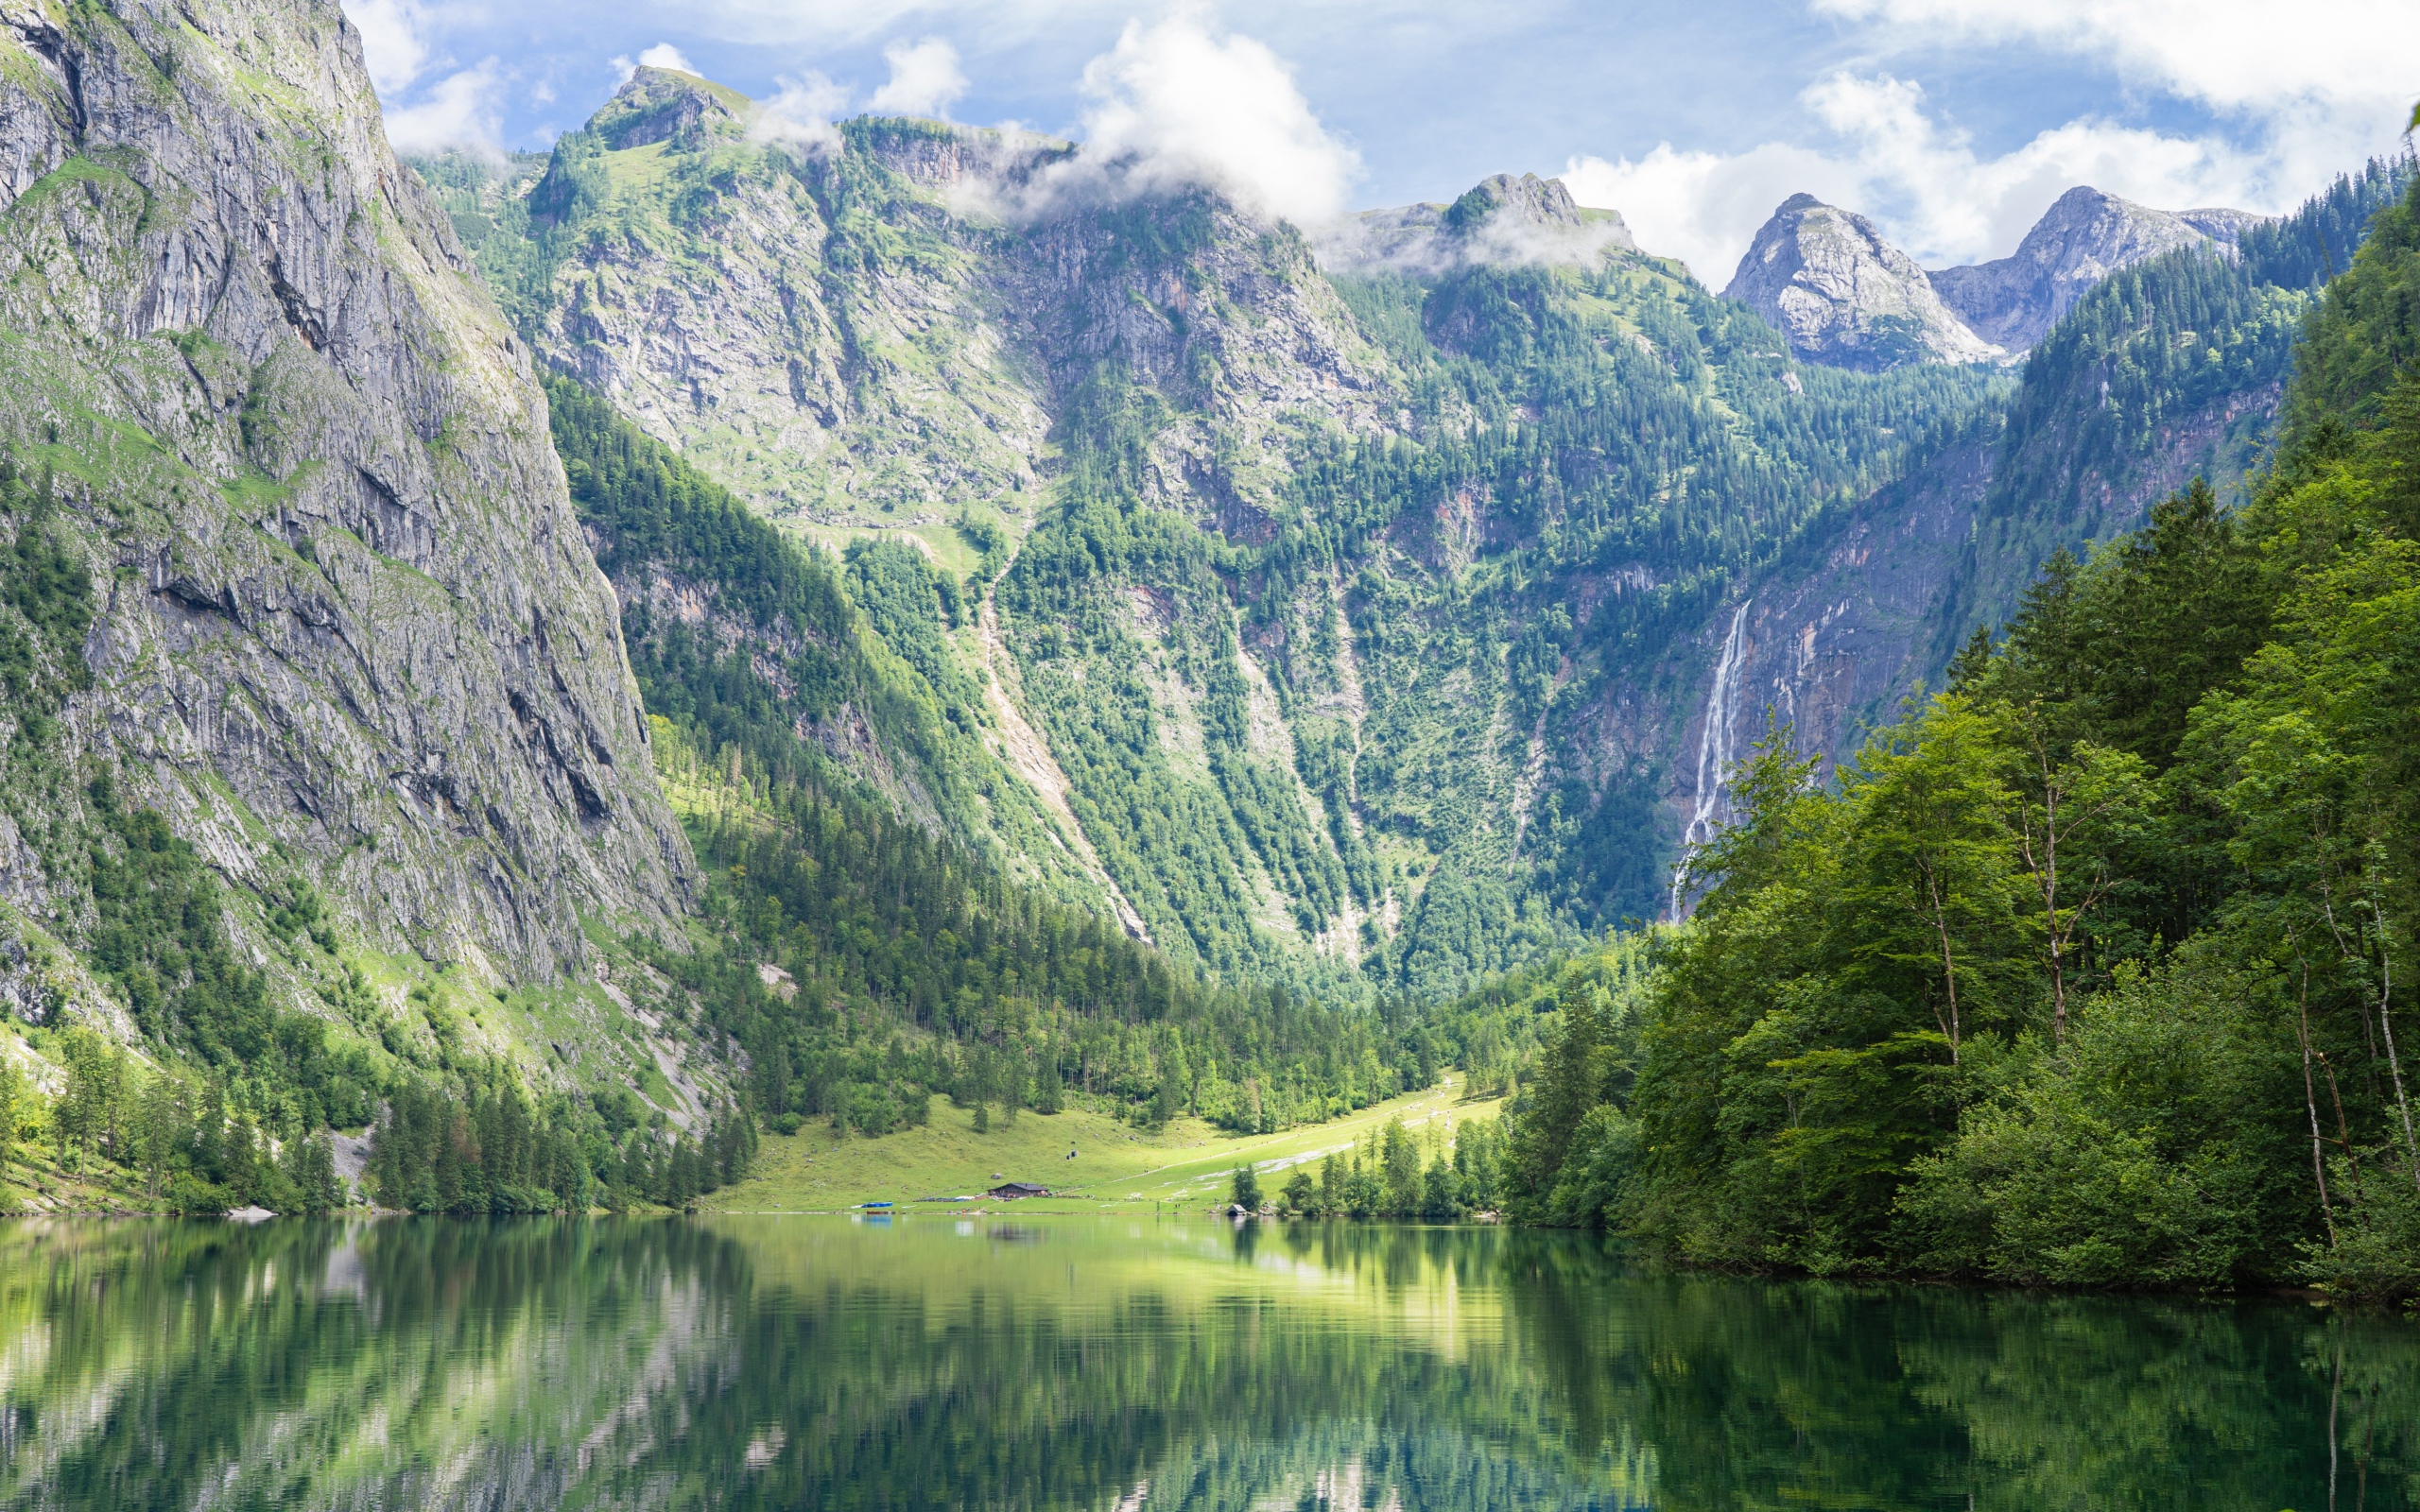 High mountains by the lake with green trees